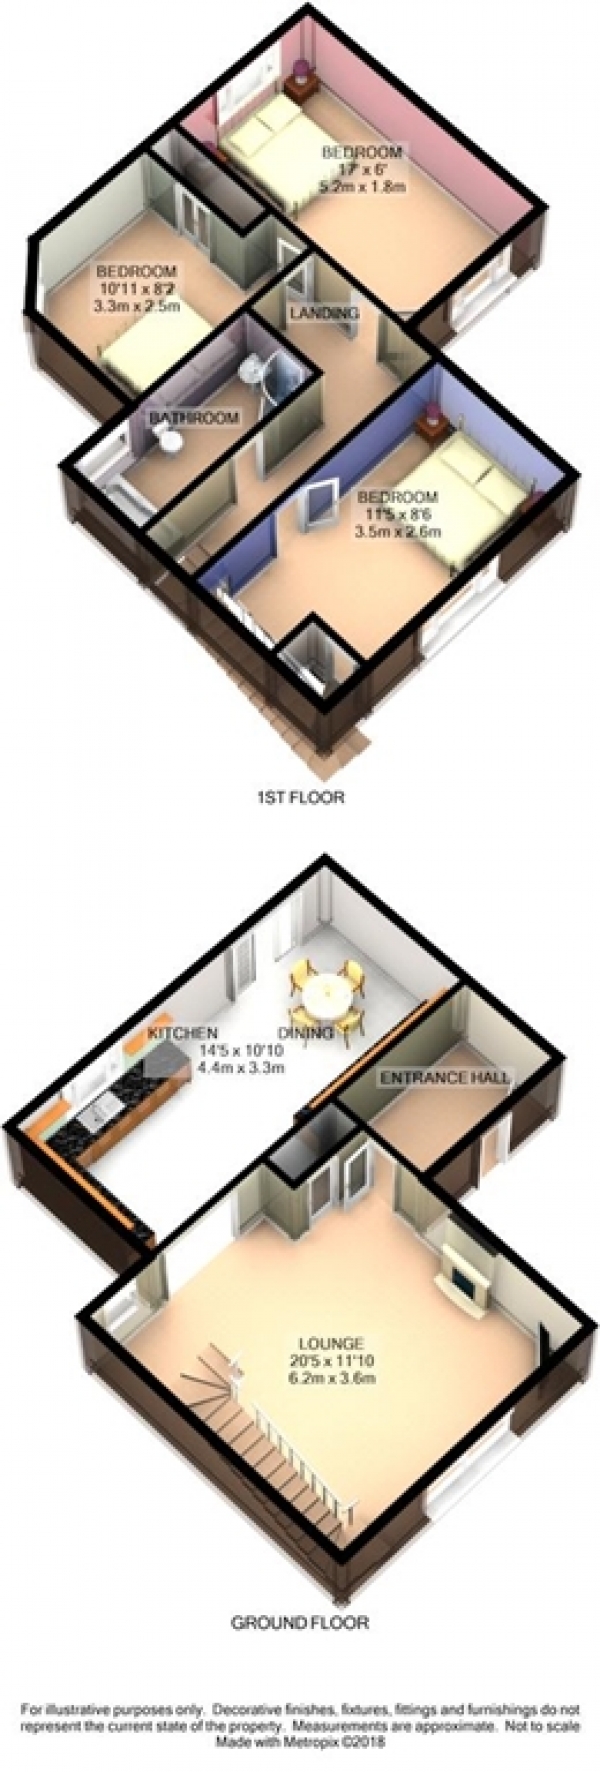 Floor Plan Image for 3 Bedroom Semi-Detached House for Sale in Beatty Drive, Westhoughton, Bolton BL5 3TP